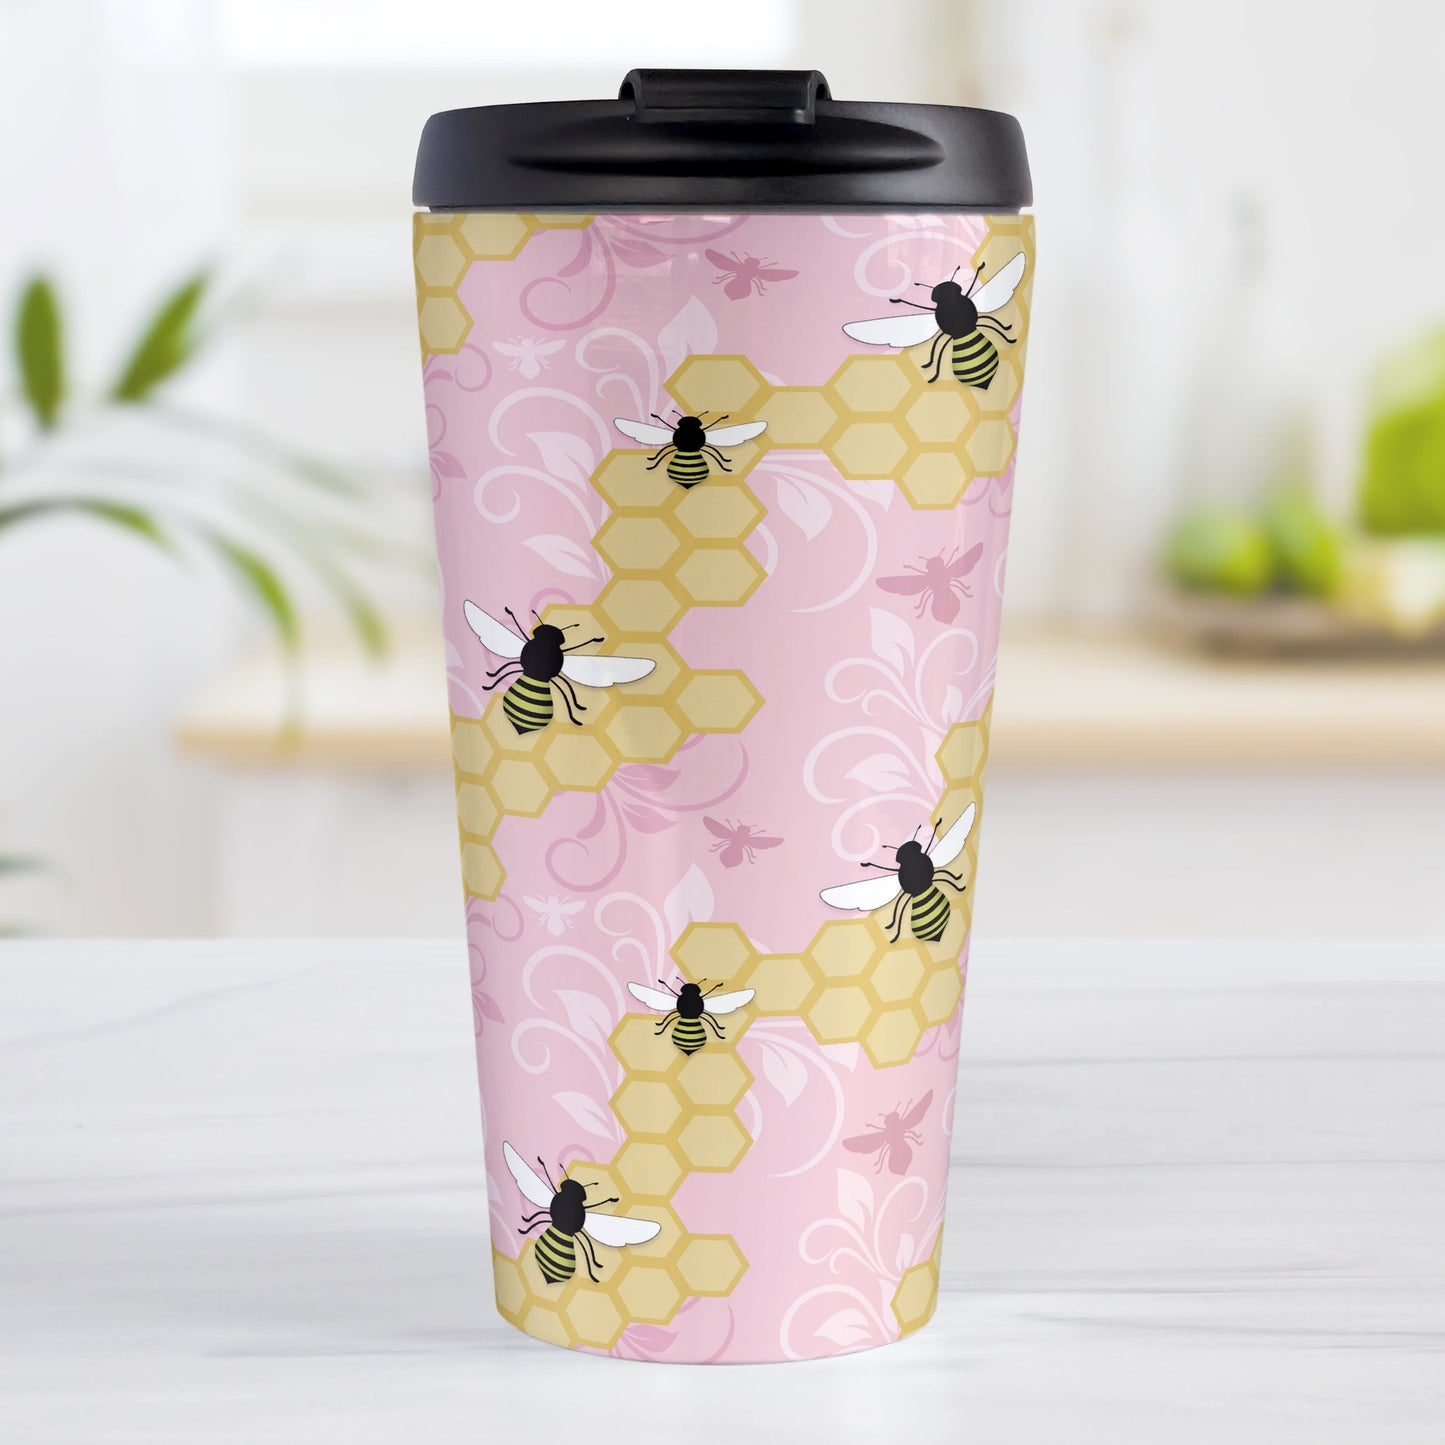 Pink Honeycomb Bee Travel Mug (15oz, stainless steel insulated) at Amy's Coffee Mugs. A travel mug designed with a pattern of black and yellow bees on honeycomb lines over a pink flourish background that wraps around the tapered shaped mug.